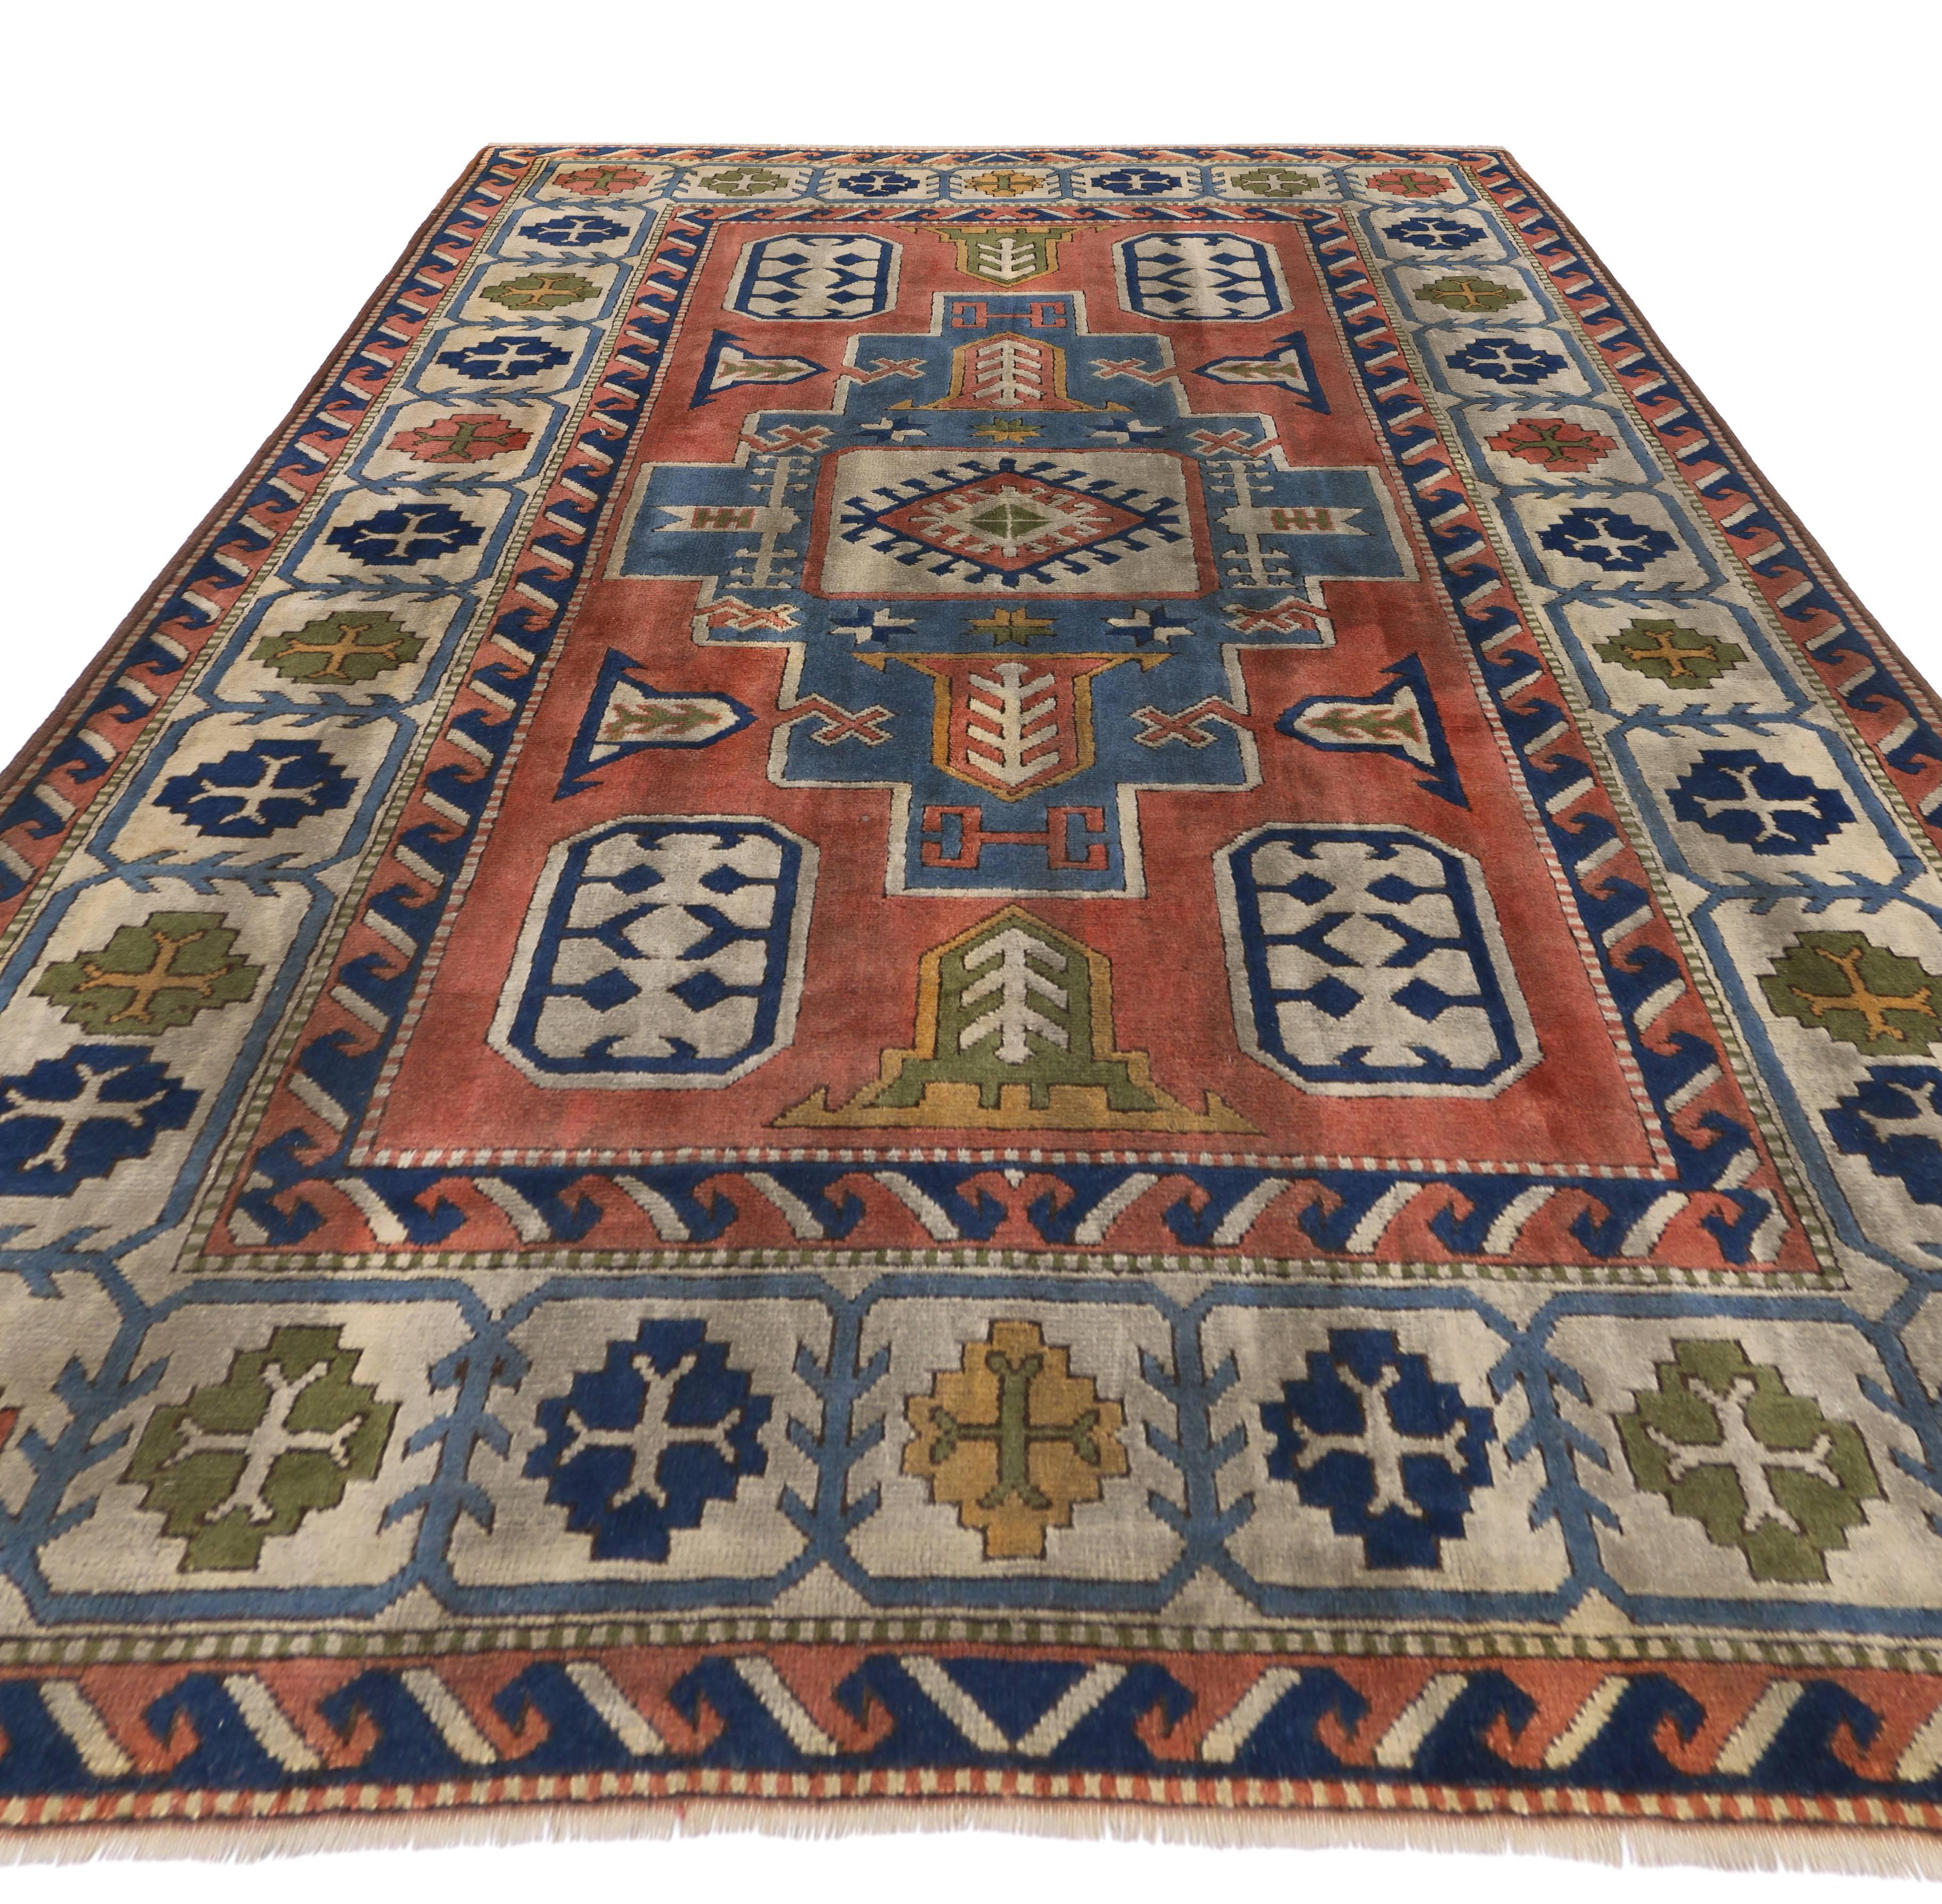 Vintage Turkish Oushak Area Rug with Tribal Style In Good Condition For Sale In Dallas, TX